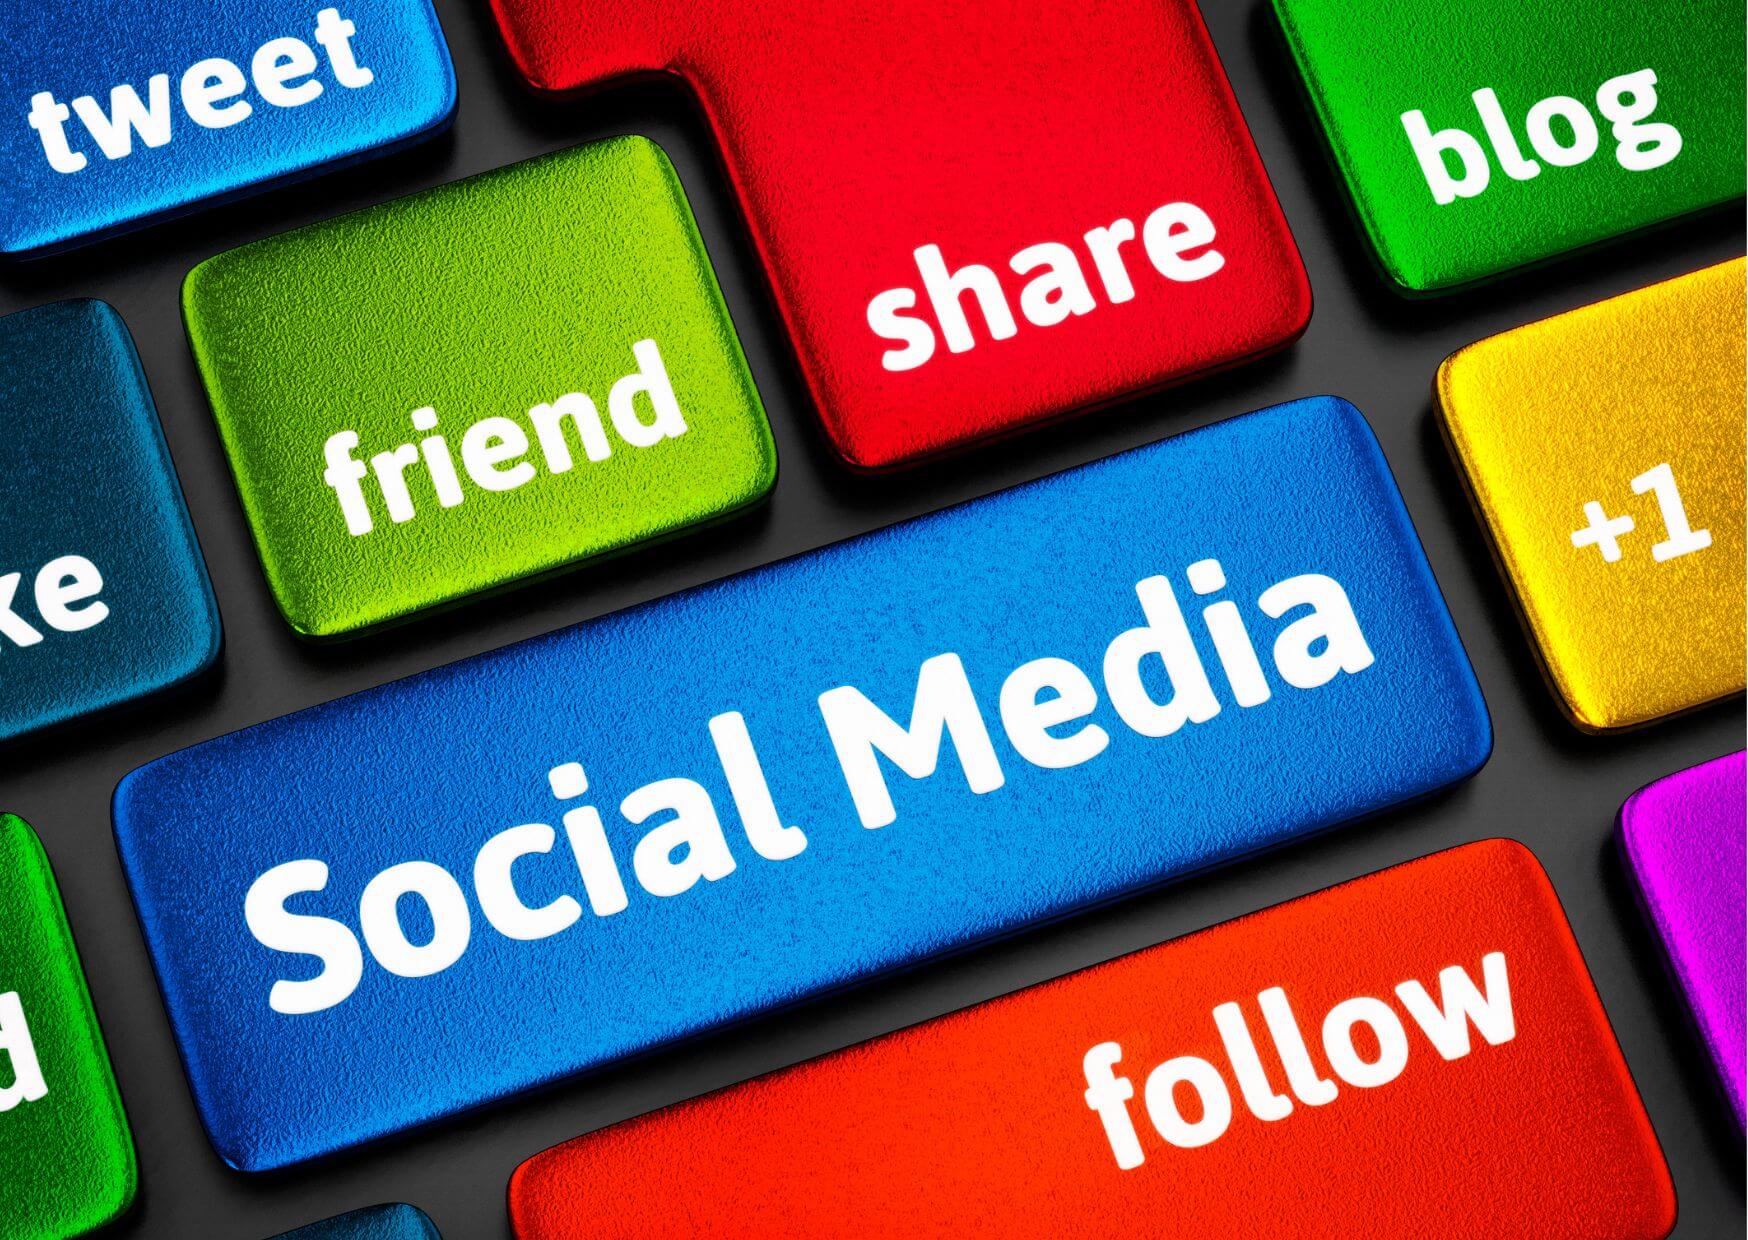 Social Media • Dissolve the Clutter from Your Head